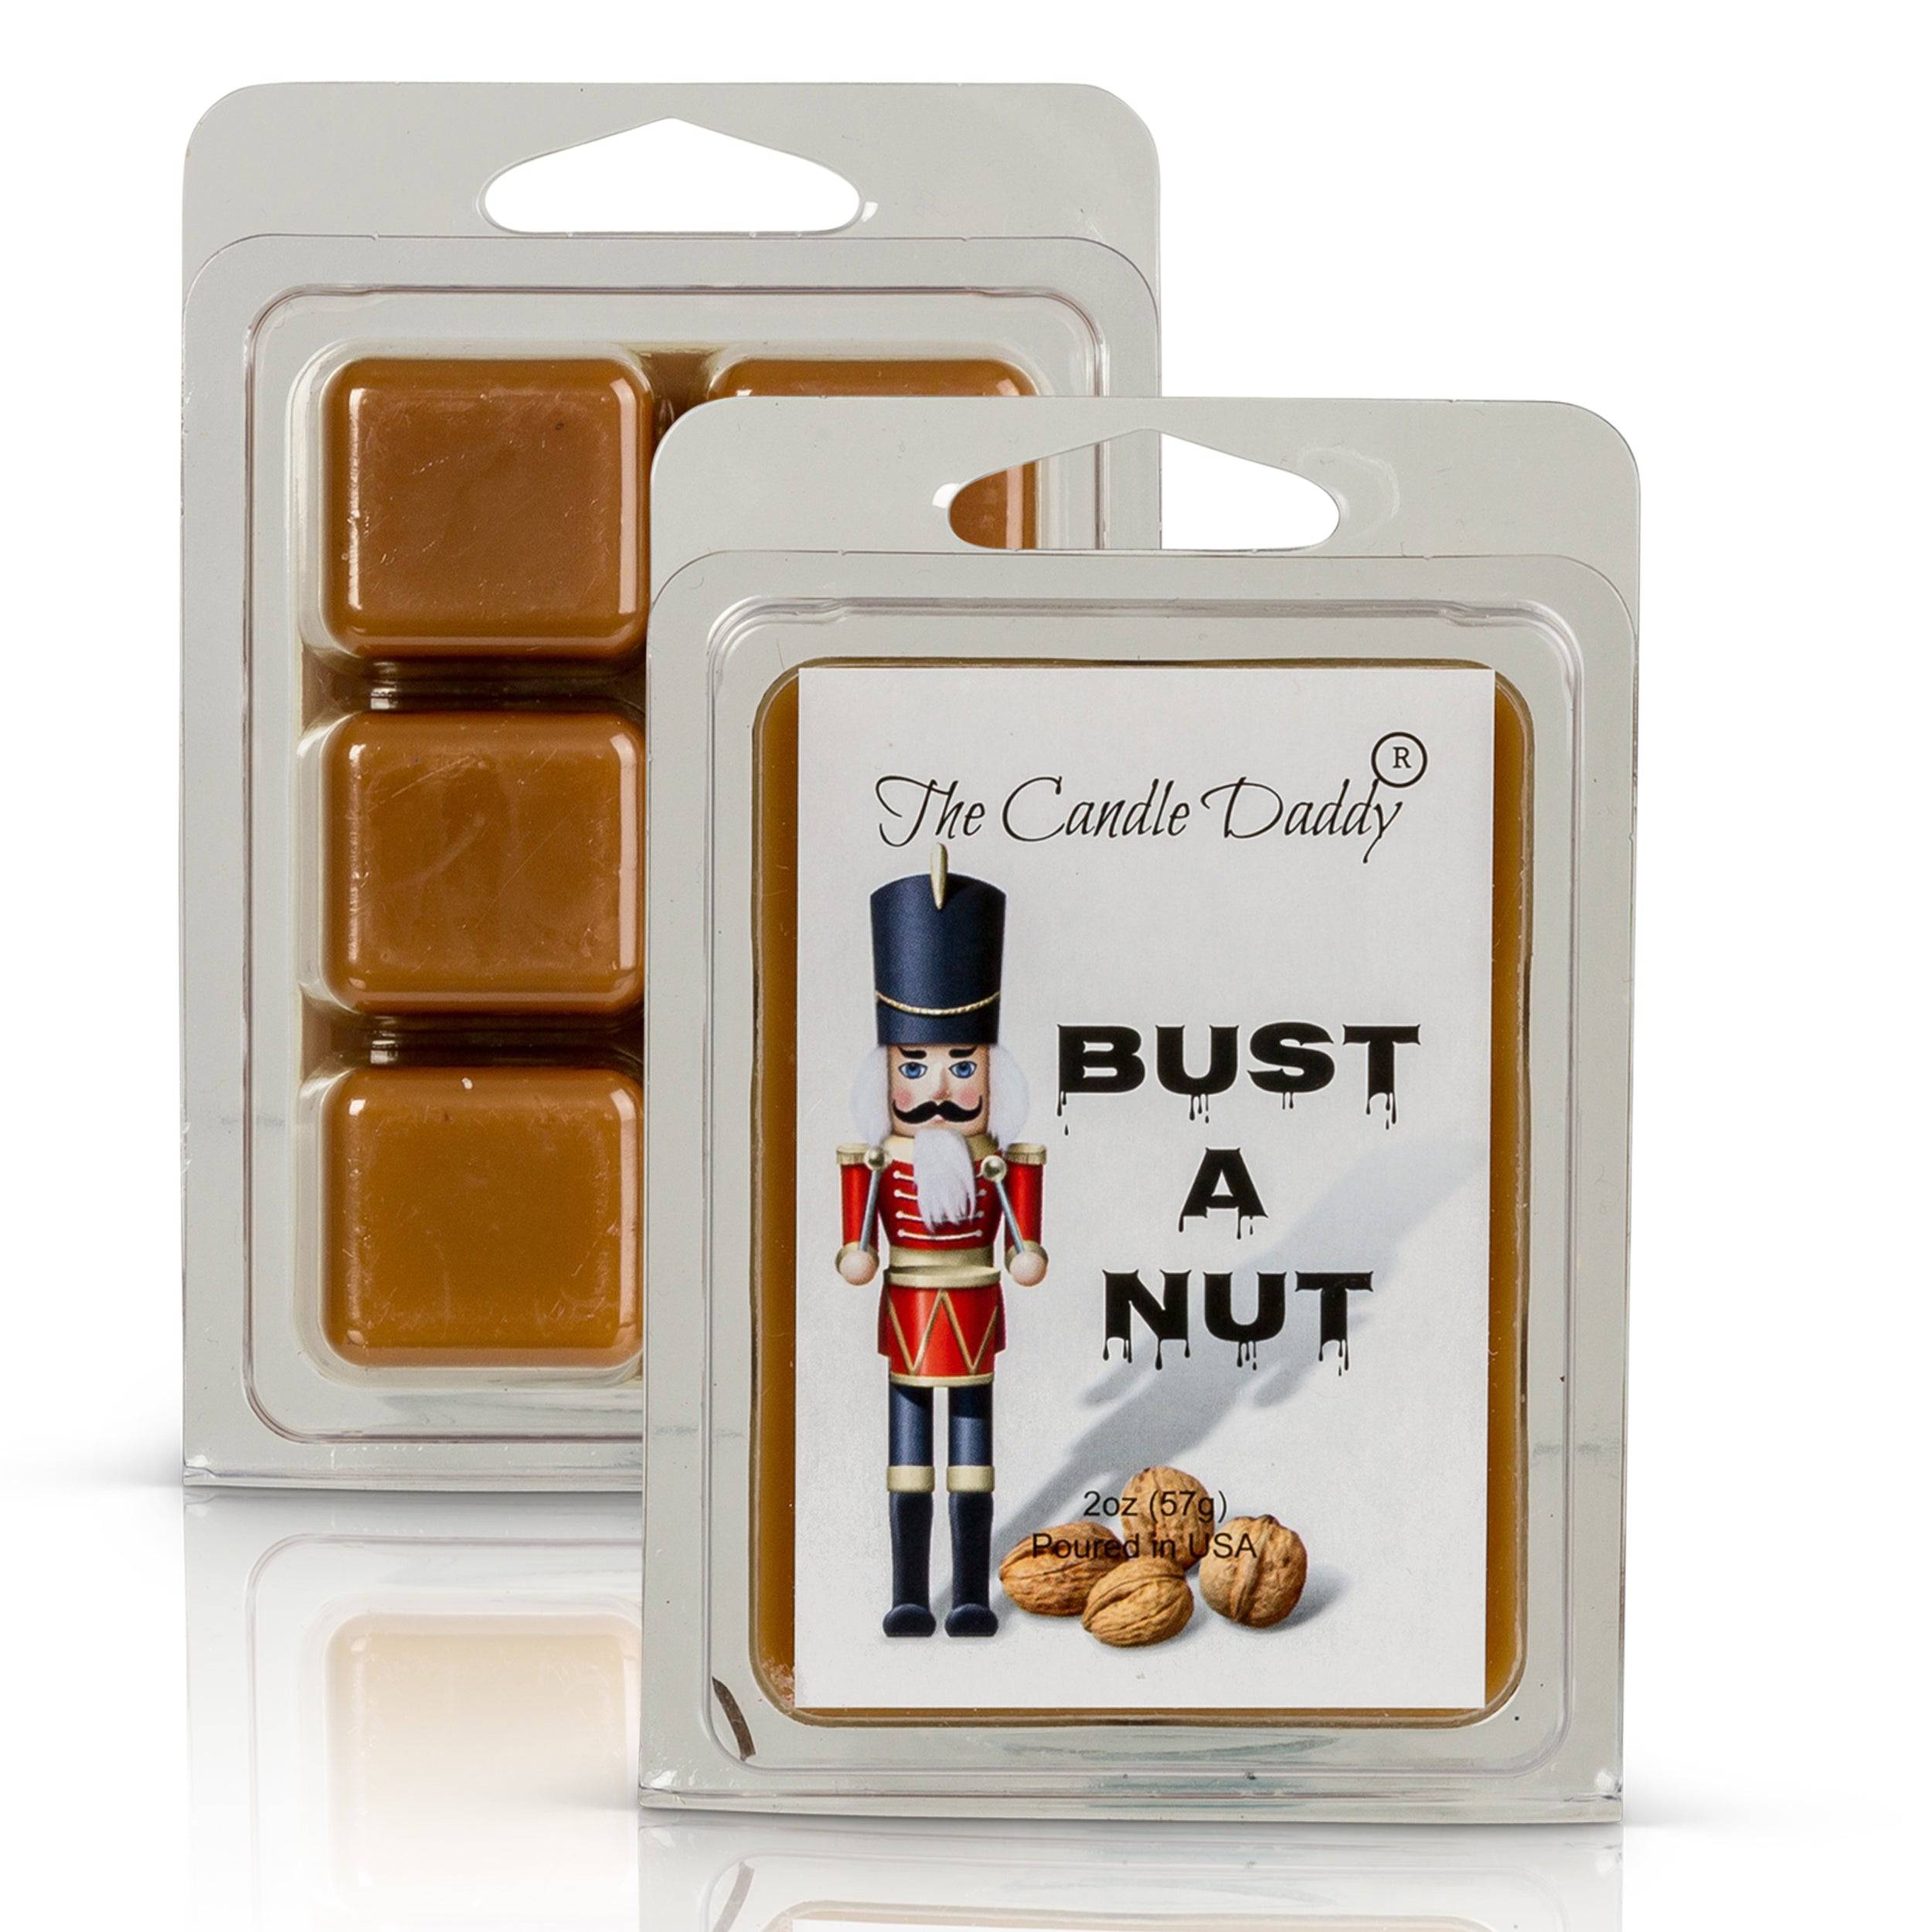 Cookie Scented Wax Melts - Novelty fun Baked scents